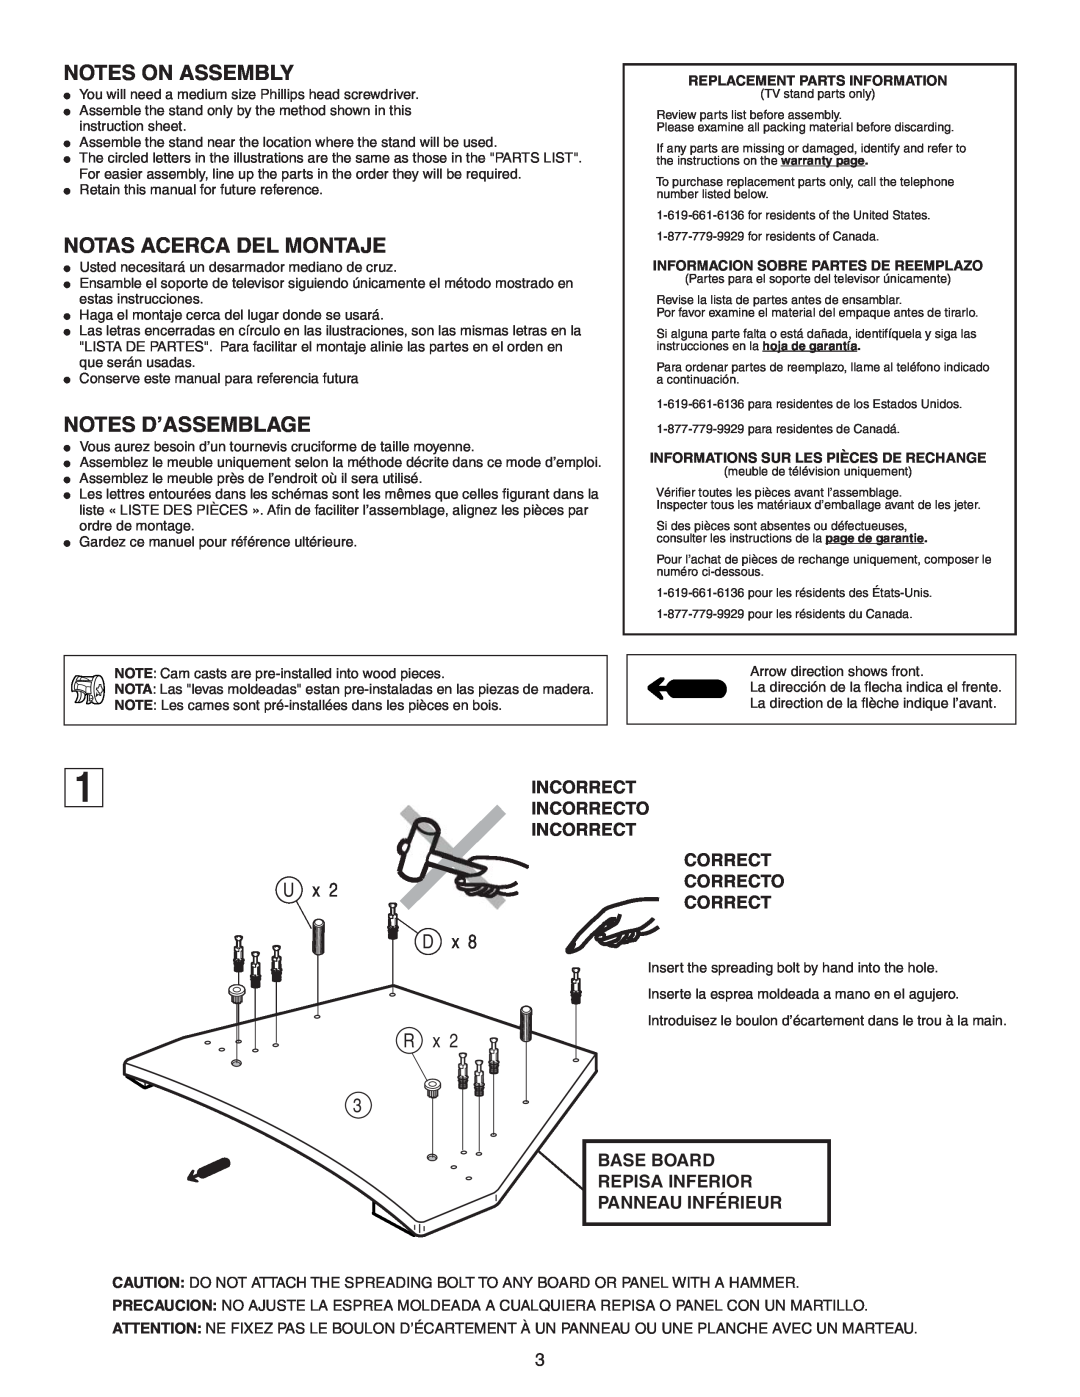 Sony SU-36F2 manual Notes On Assembly, Notas Acerca Del Montaje, Notes D’Assemblage, R x 3, Incorrect Incorrecto Incorrect 